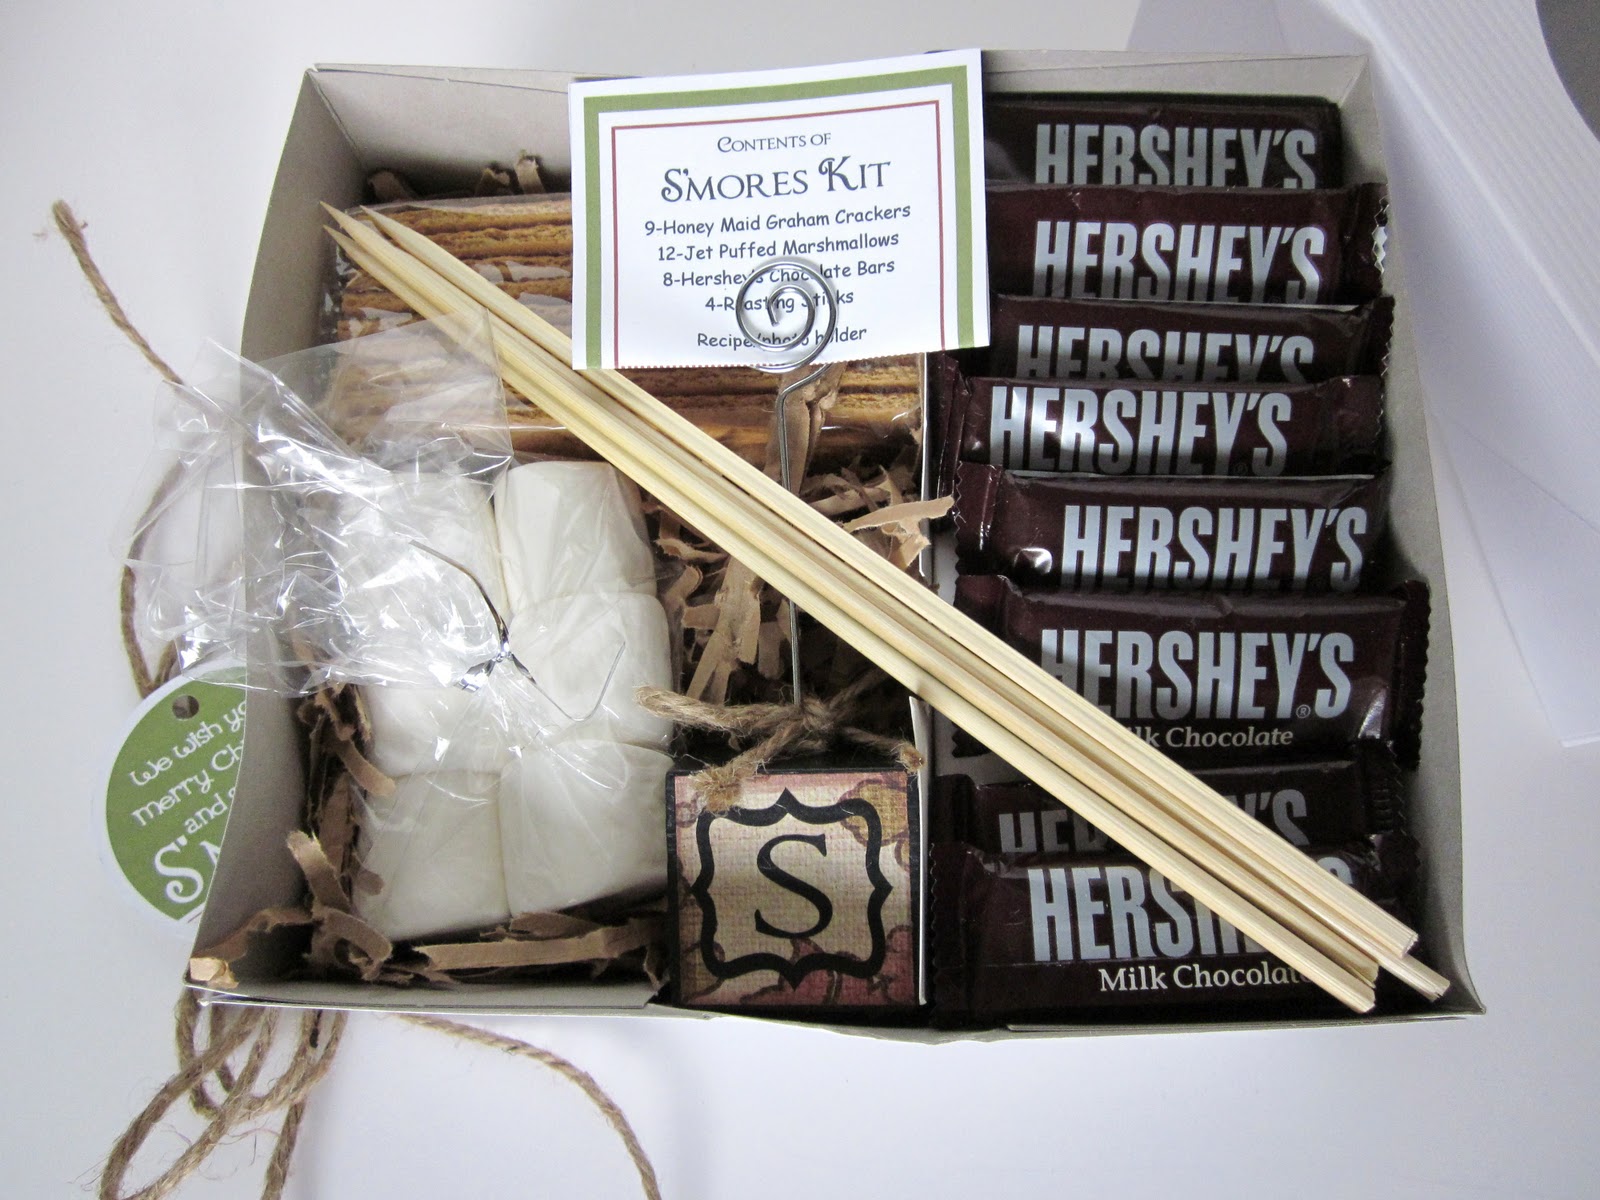 S'mores Kits